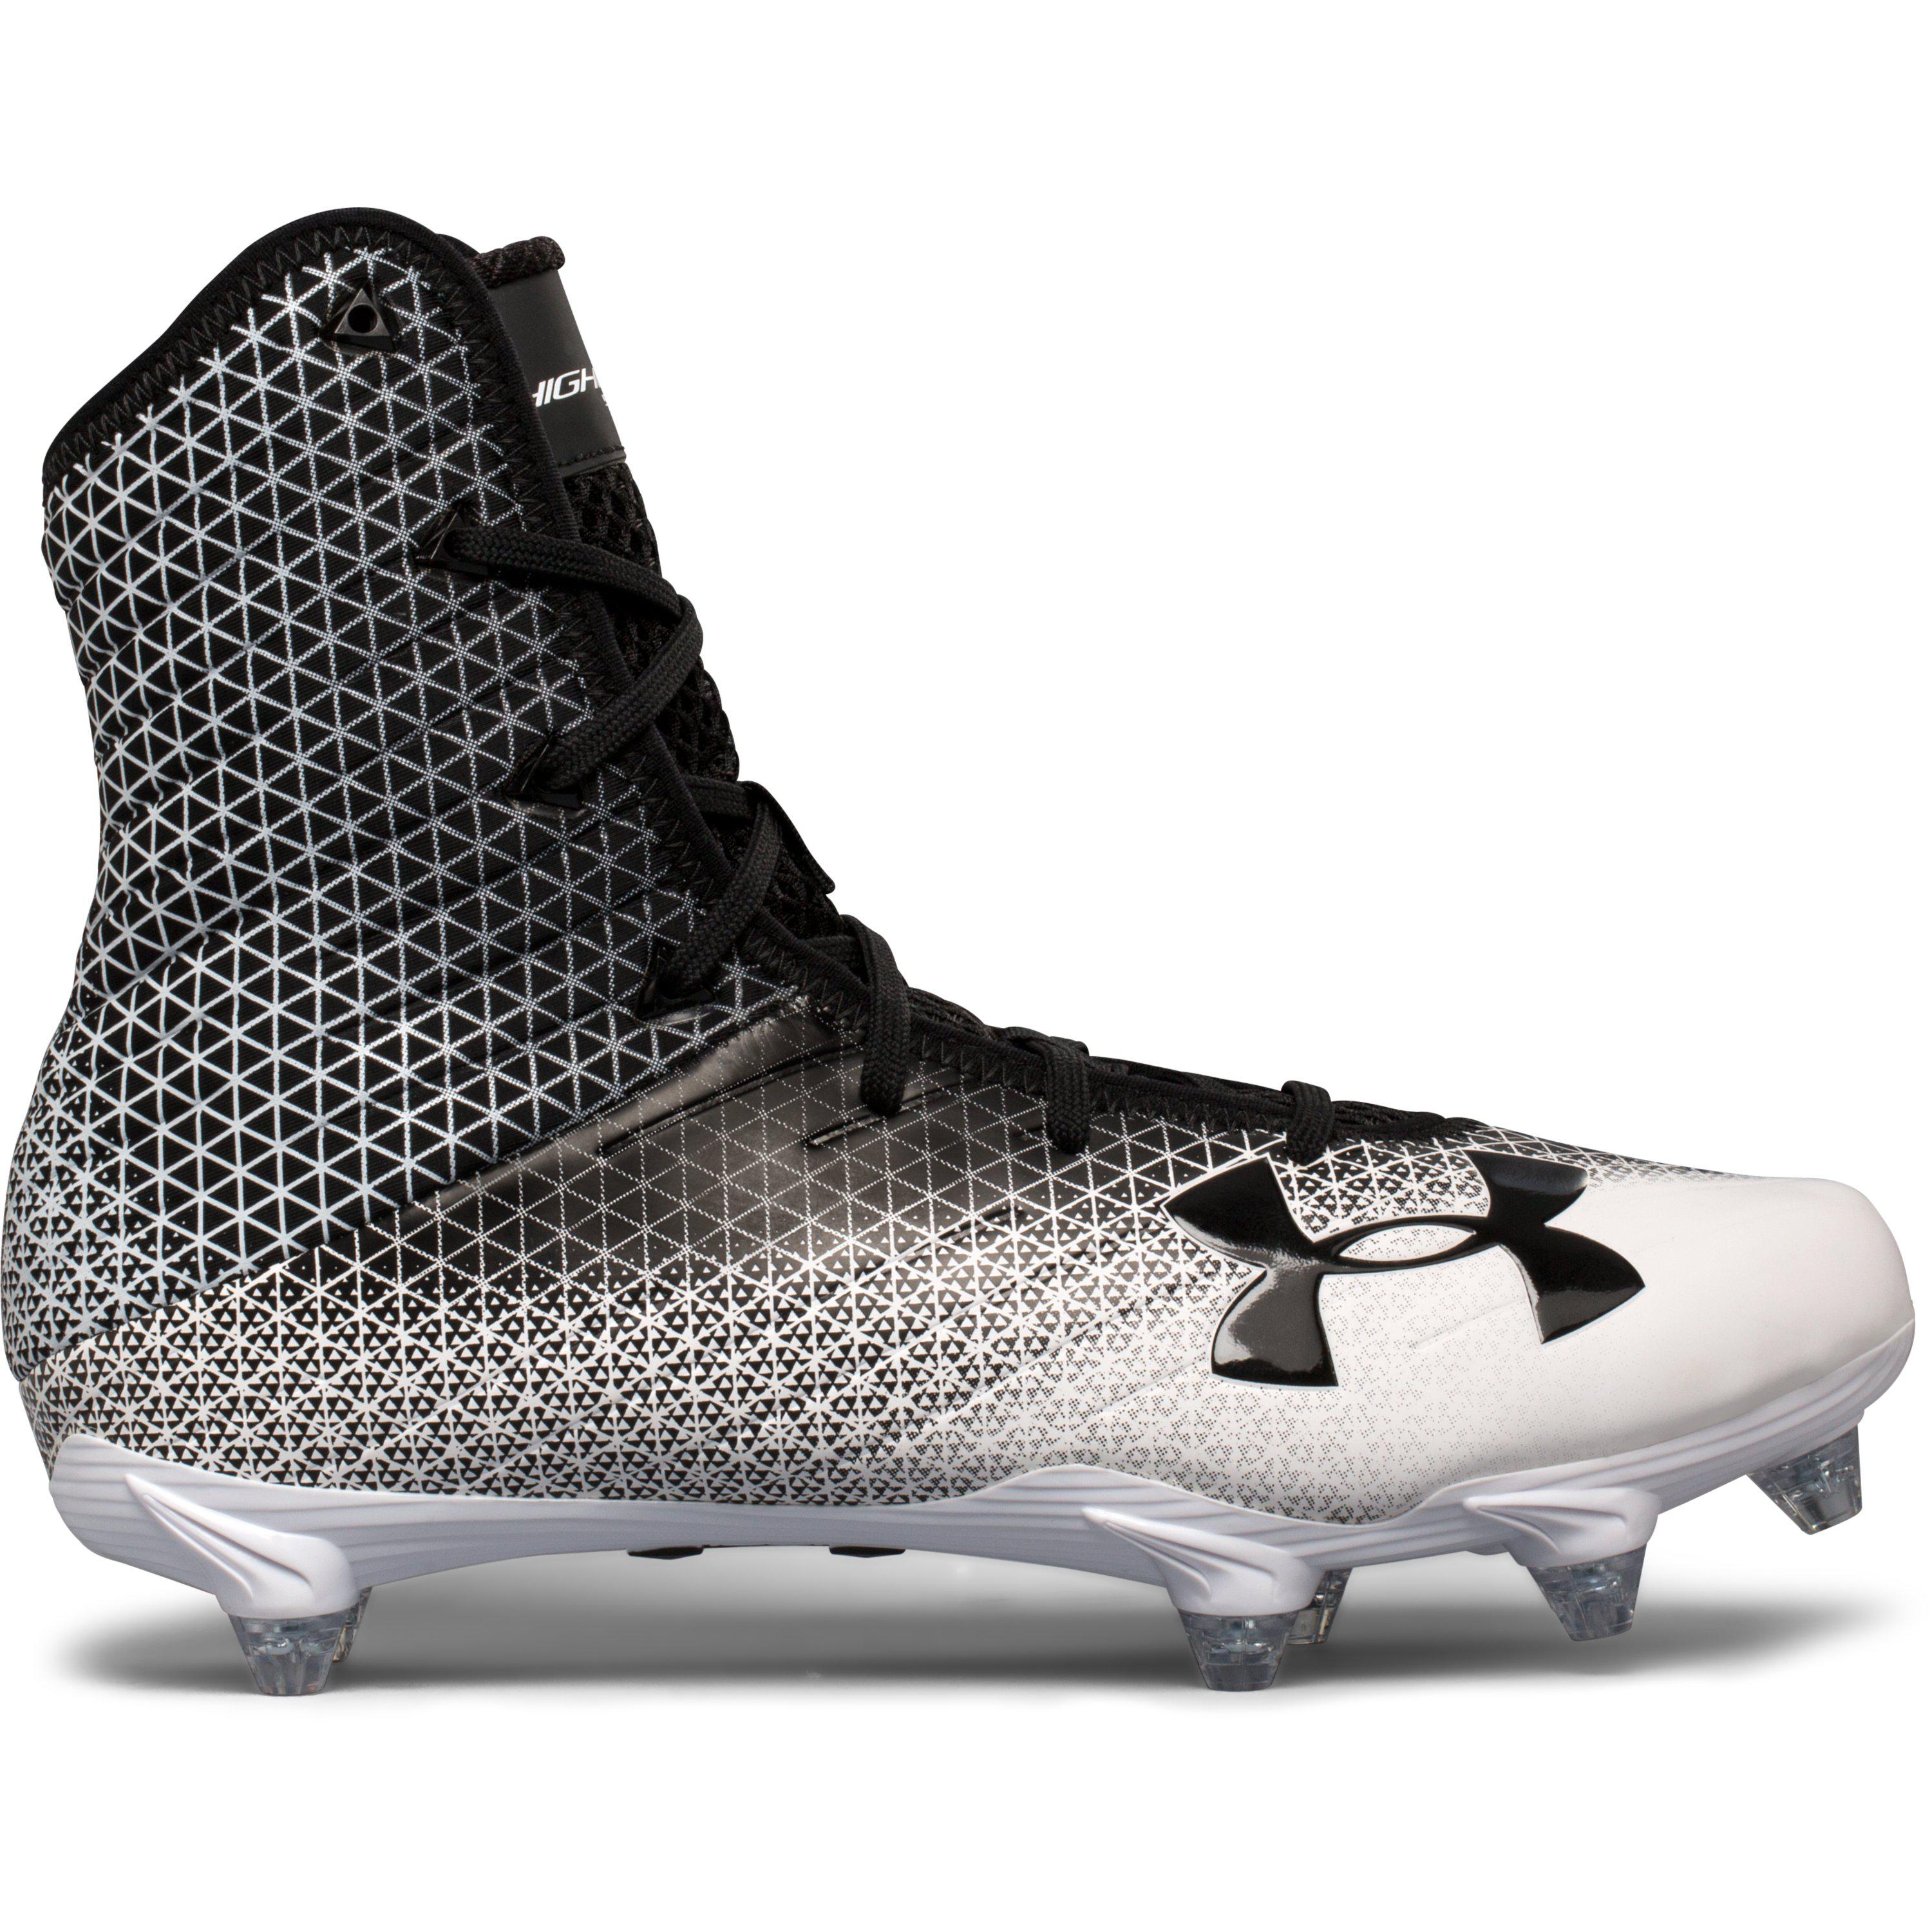 New Mens Under Armour Highlight Select D Football Cleat White/Black Sz 9.5 M 